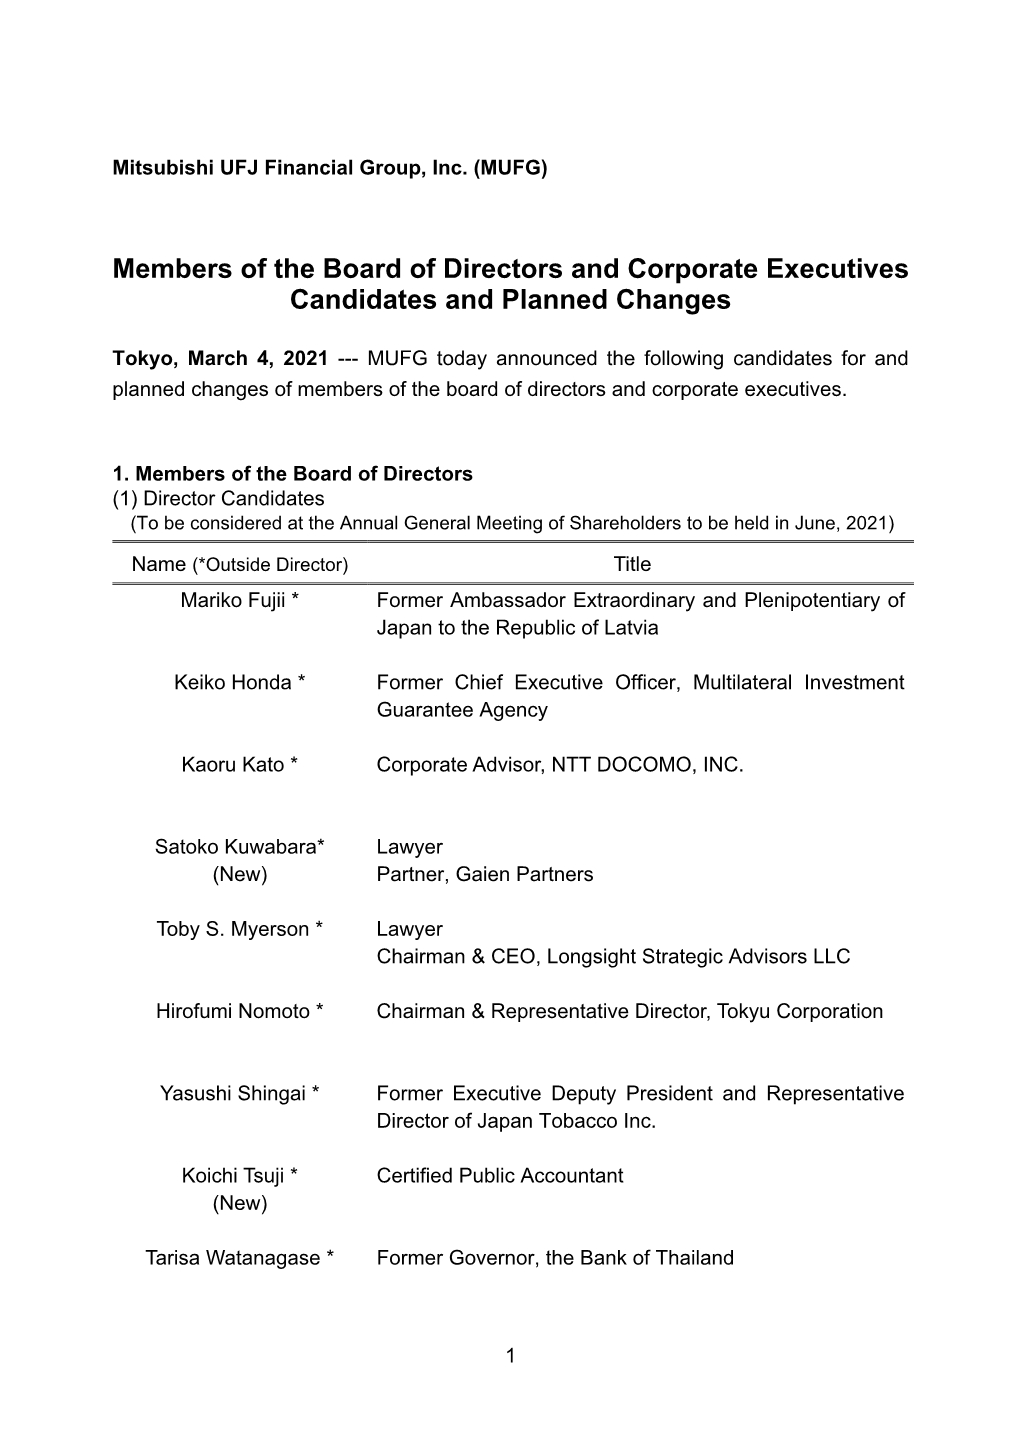 Members of the Board of Directors and Corporate Executives Candidates and Planned Changes